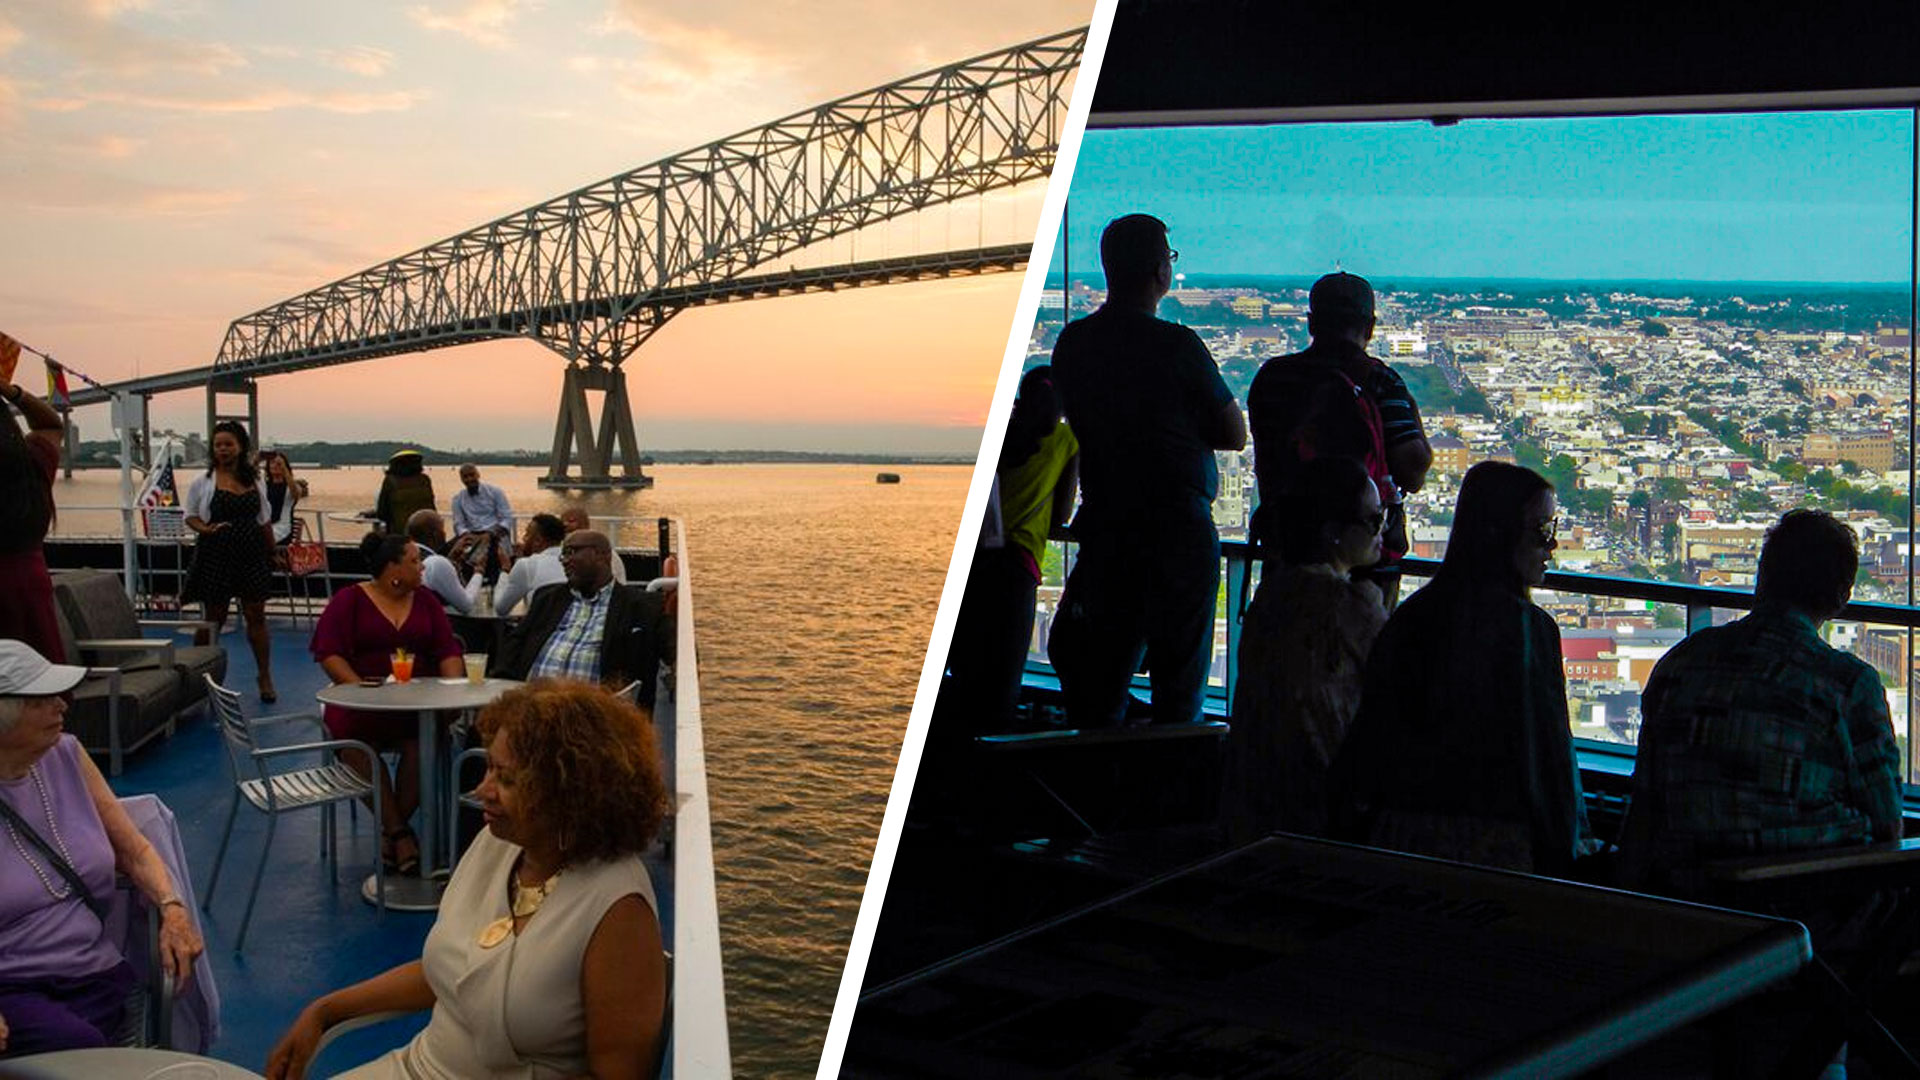 Baltimore Winter Restaurant Week Eat Like a Tourist Pairing - City Cruises and Top of the World